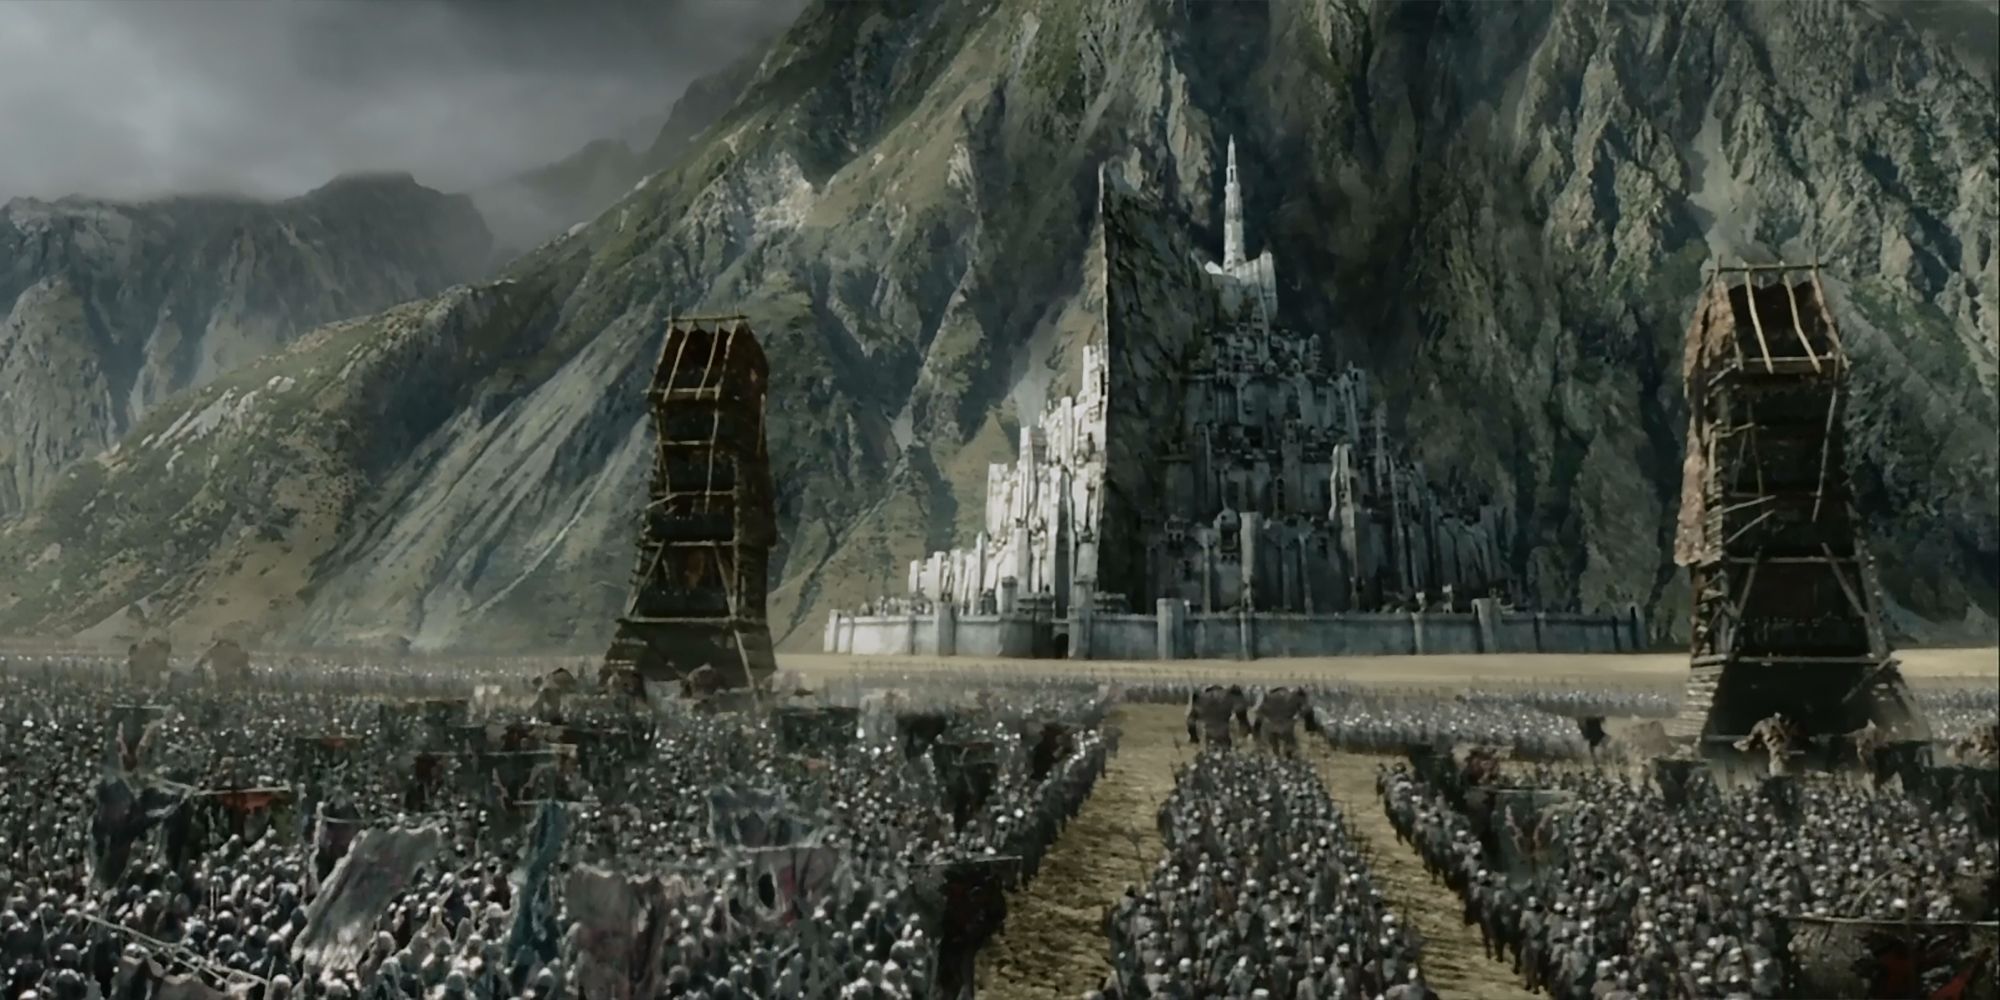 The Battle Of Pelennor Fields in The Lord of the Rings